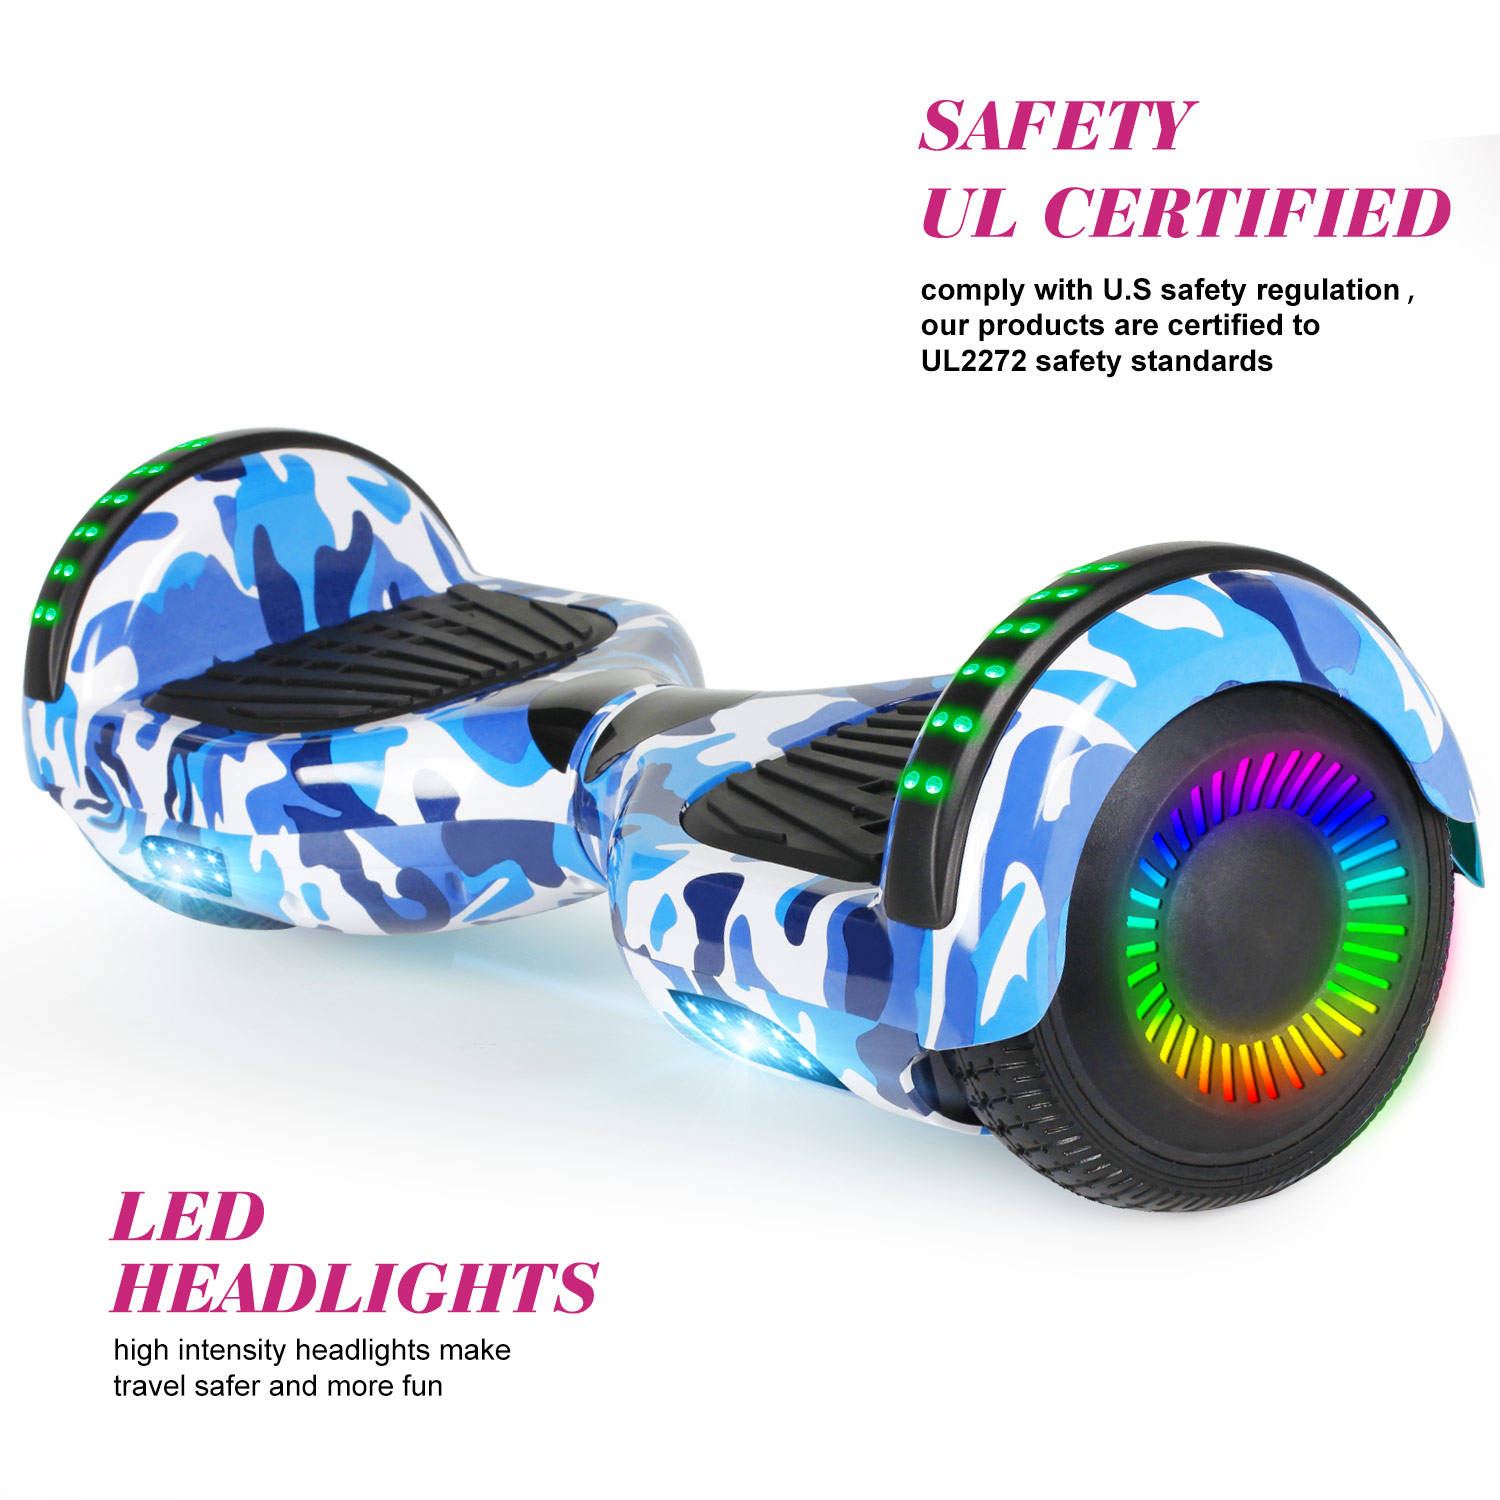 6.5” Self Balancing Electric Scooter HOVERBOARD LED+BLUETOOTH+BAG+BRAND NEW 